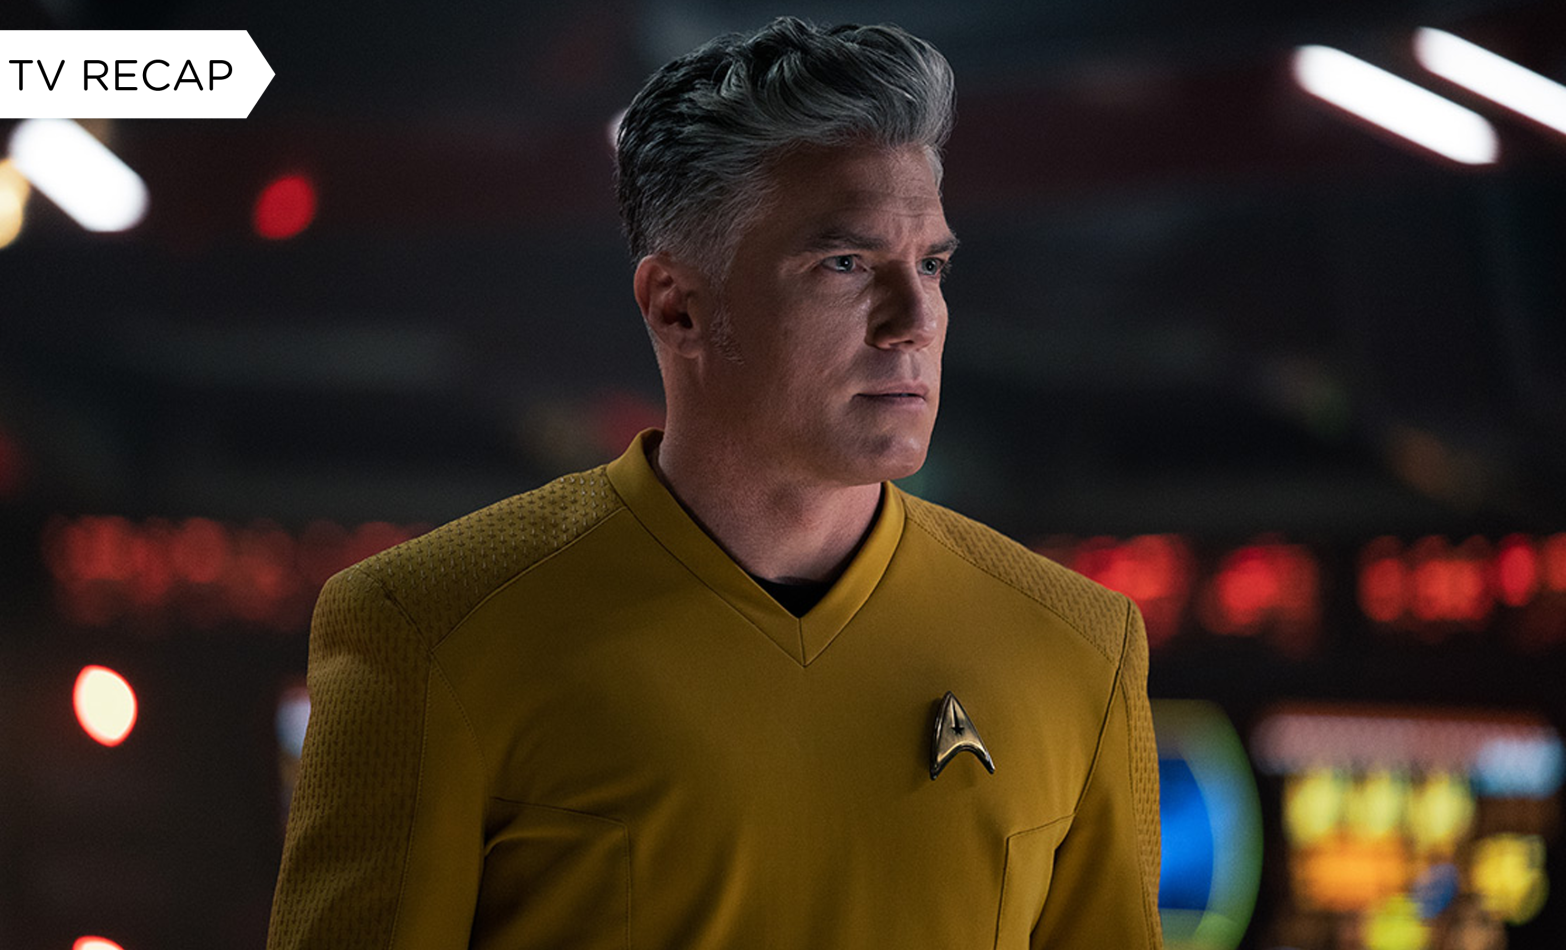 Captain Pike finds himself in a terrifying scenario. (Image: Paramount)